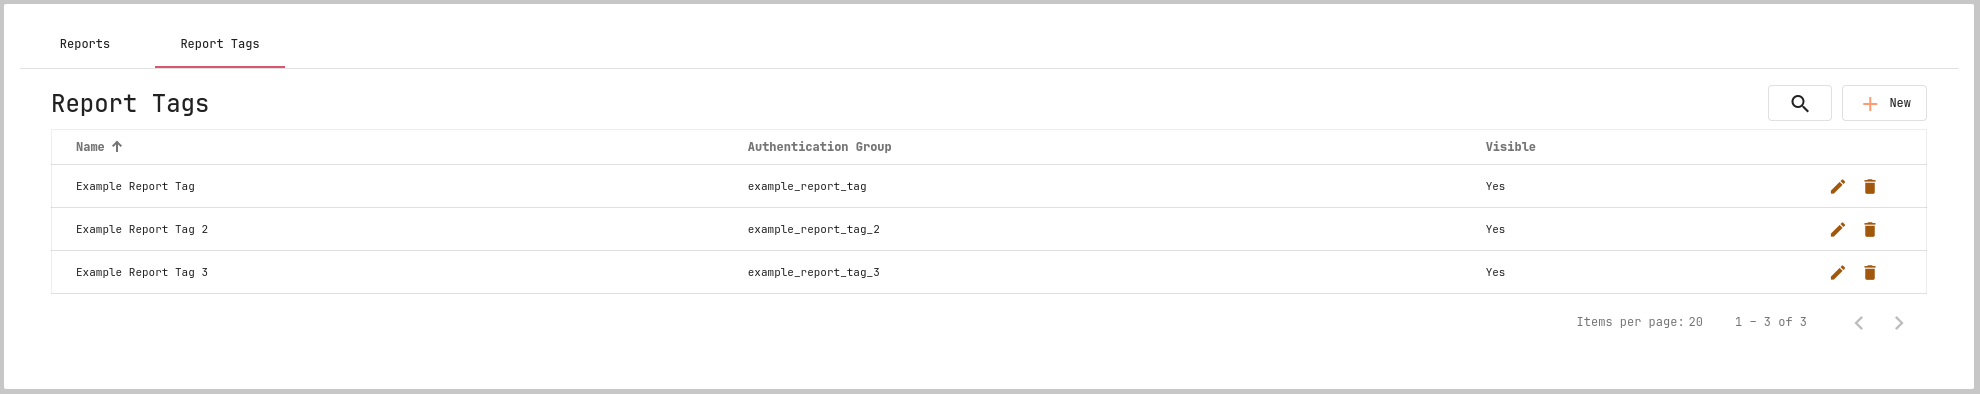 report tag list within the admin gui